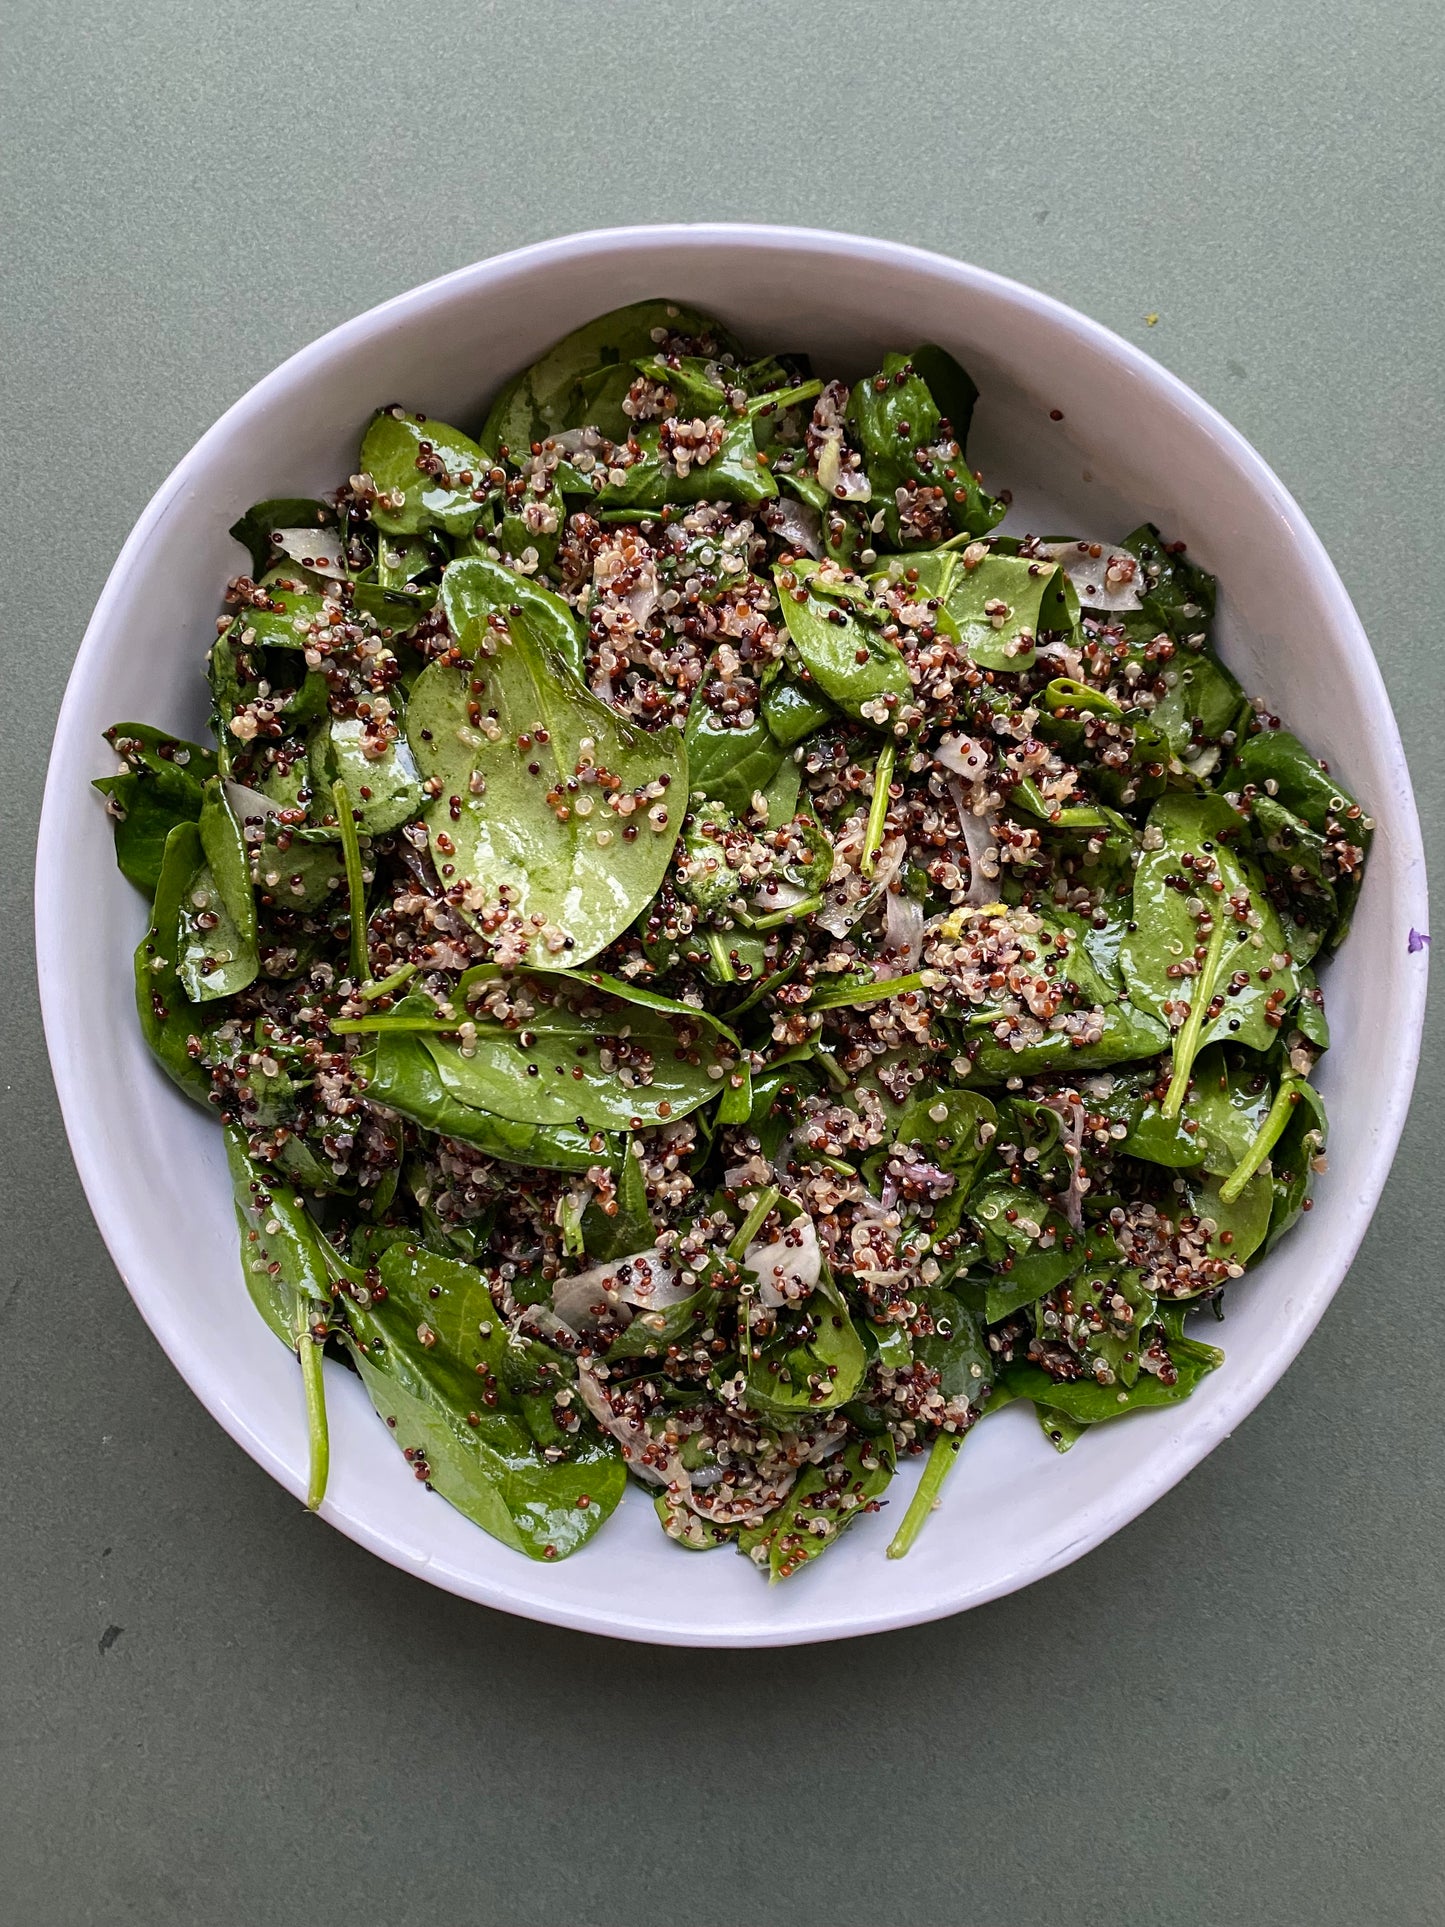 Spinach and Quinoa Salad with Fennel and Champagne Vinaigrette